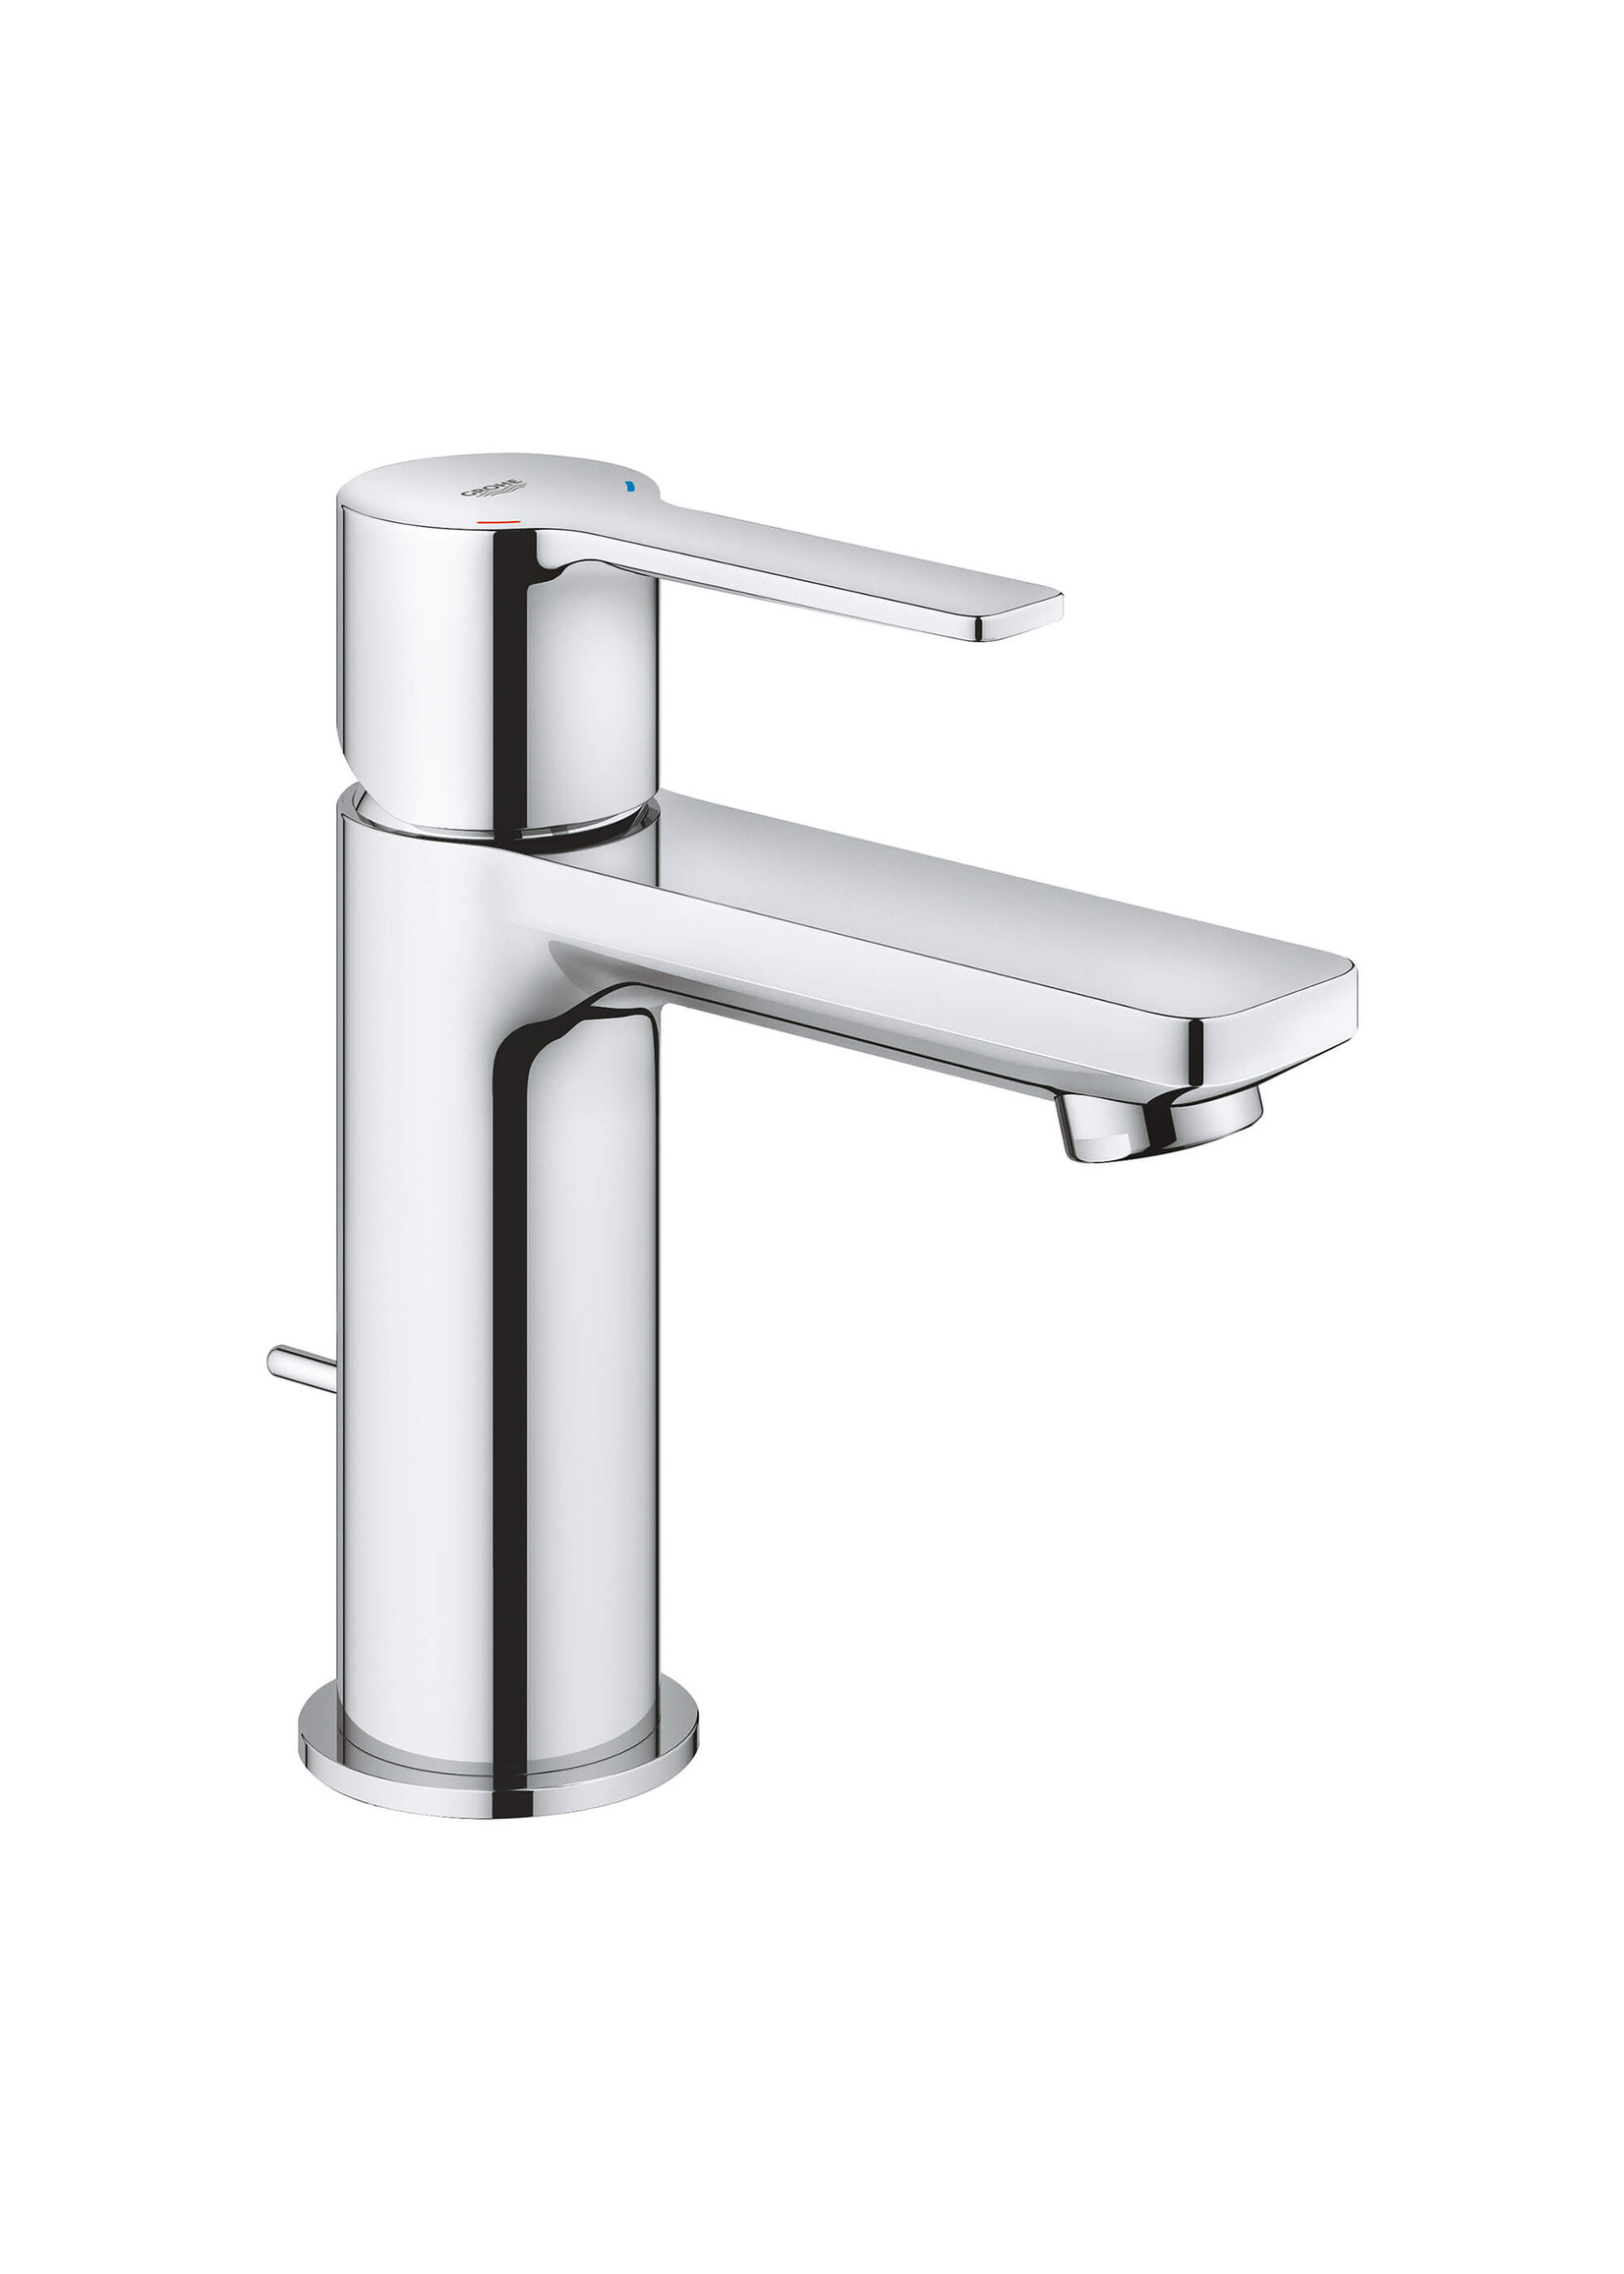 Grohe Grohe Lineare Single hole XS - Size bathroom faucet, 1.2 GPM - CP